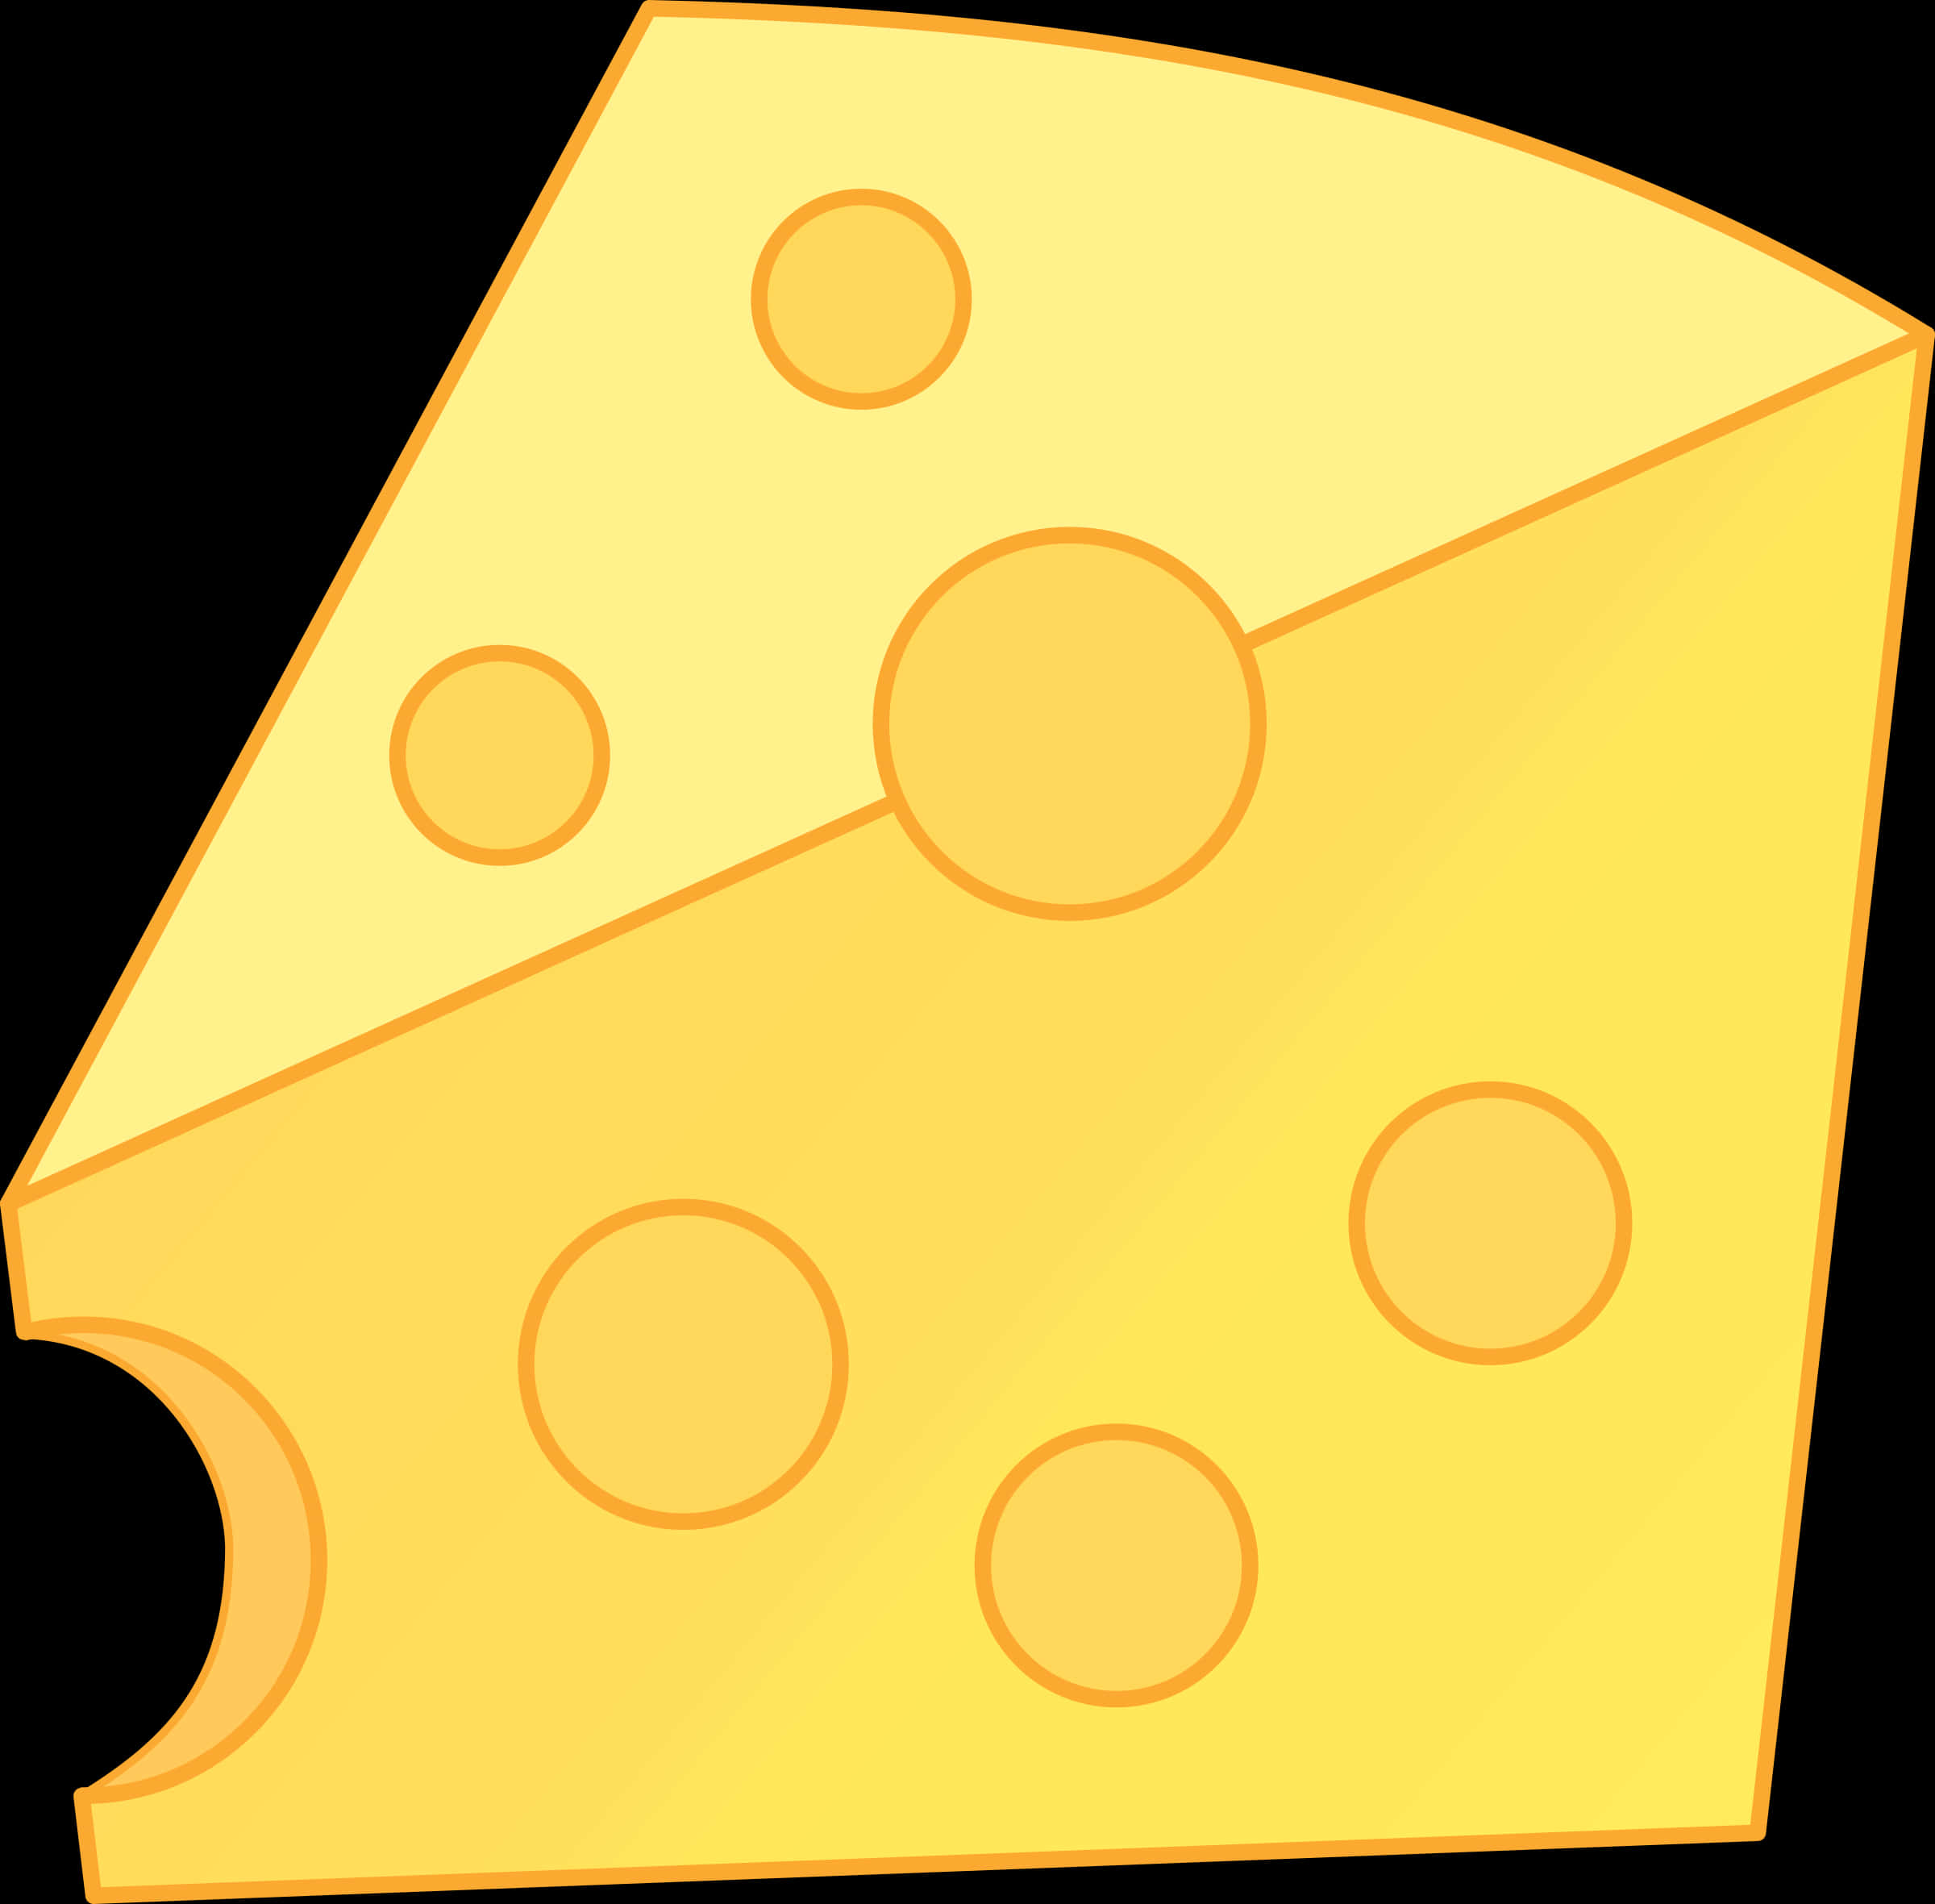 A Yellow Cheese With Holes